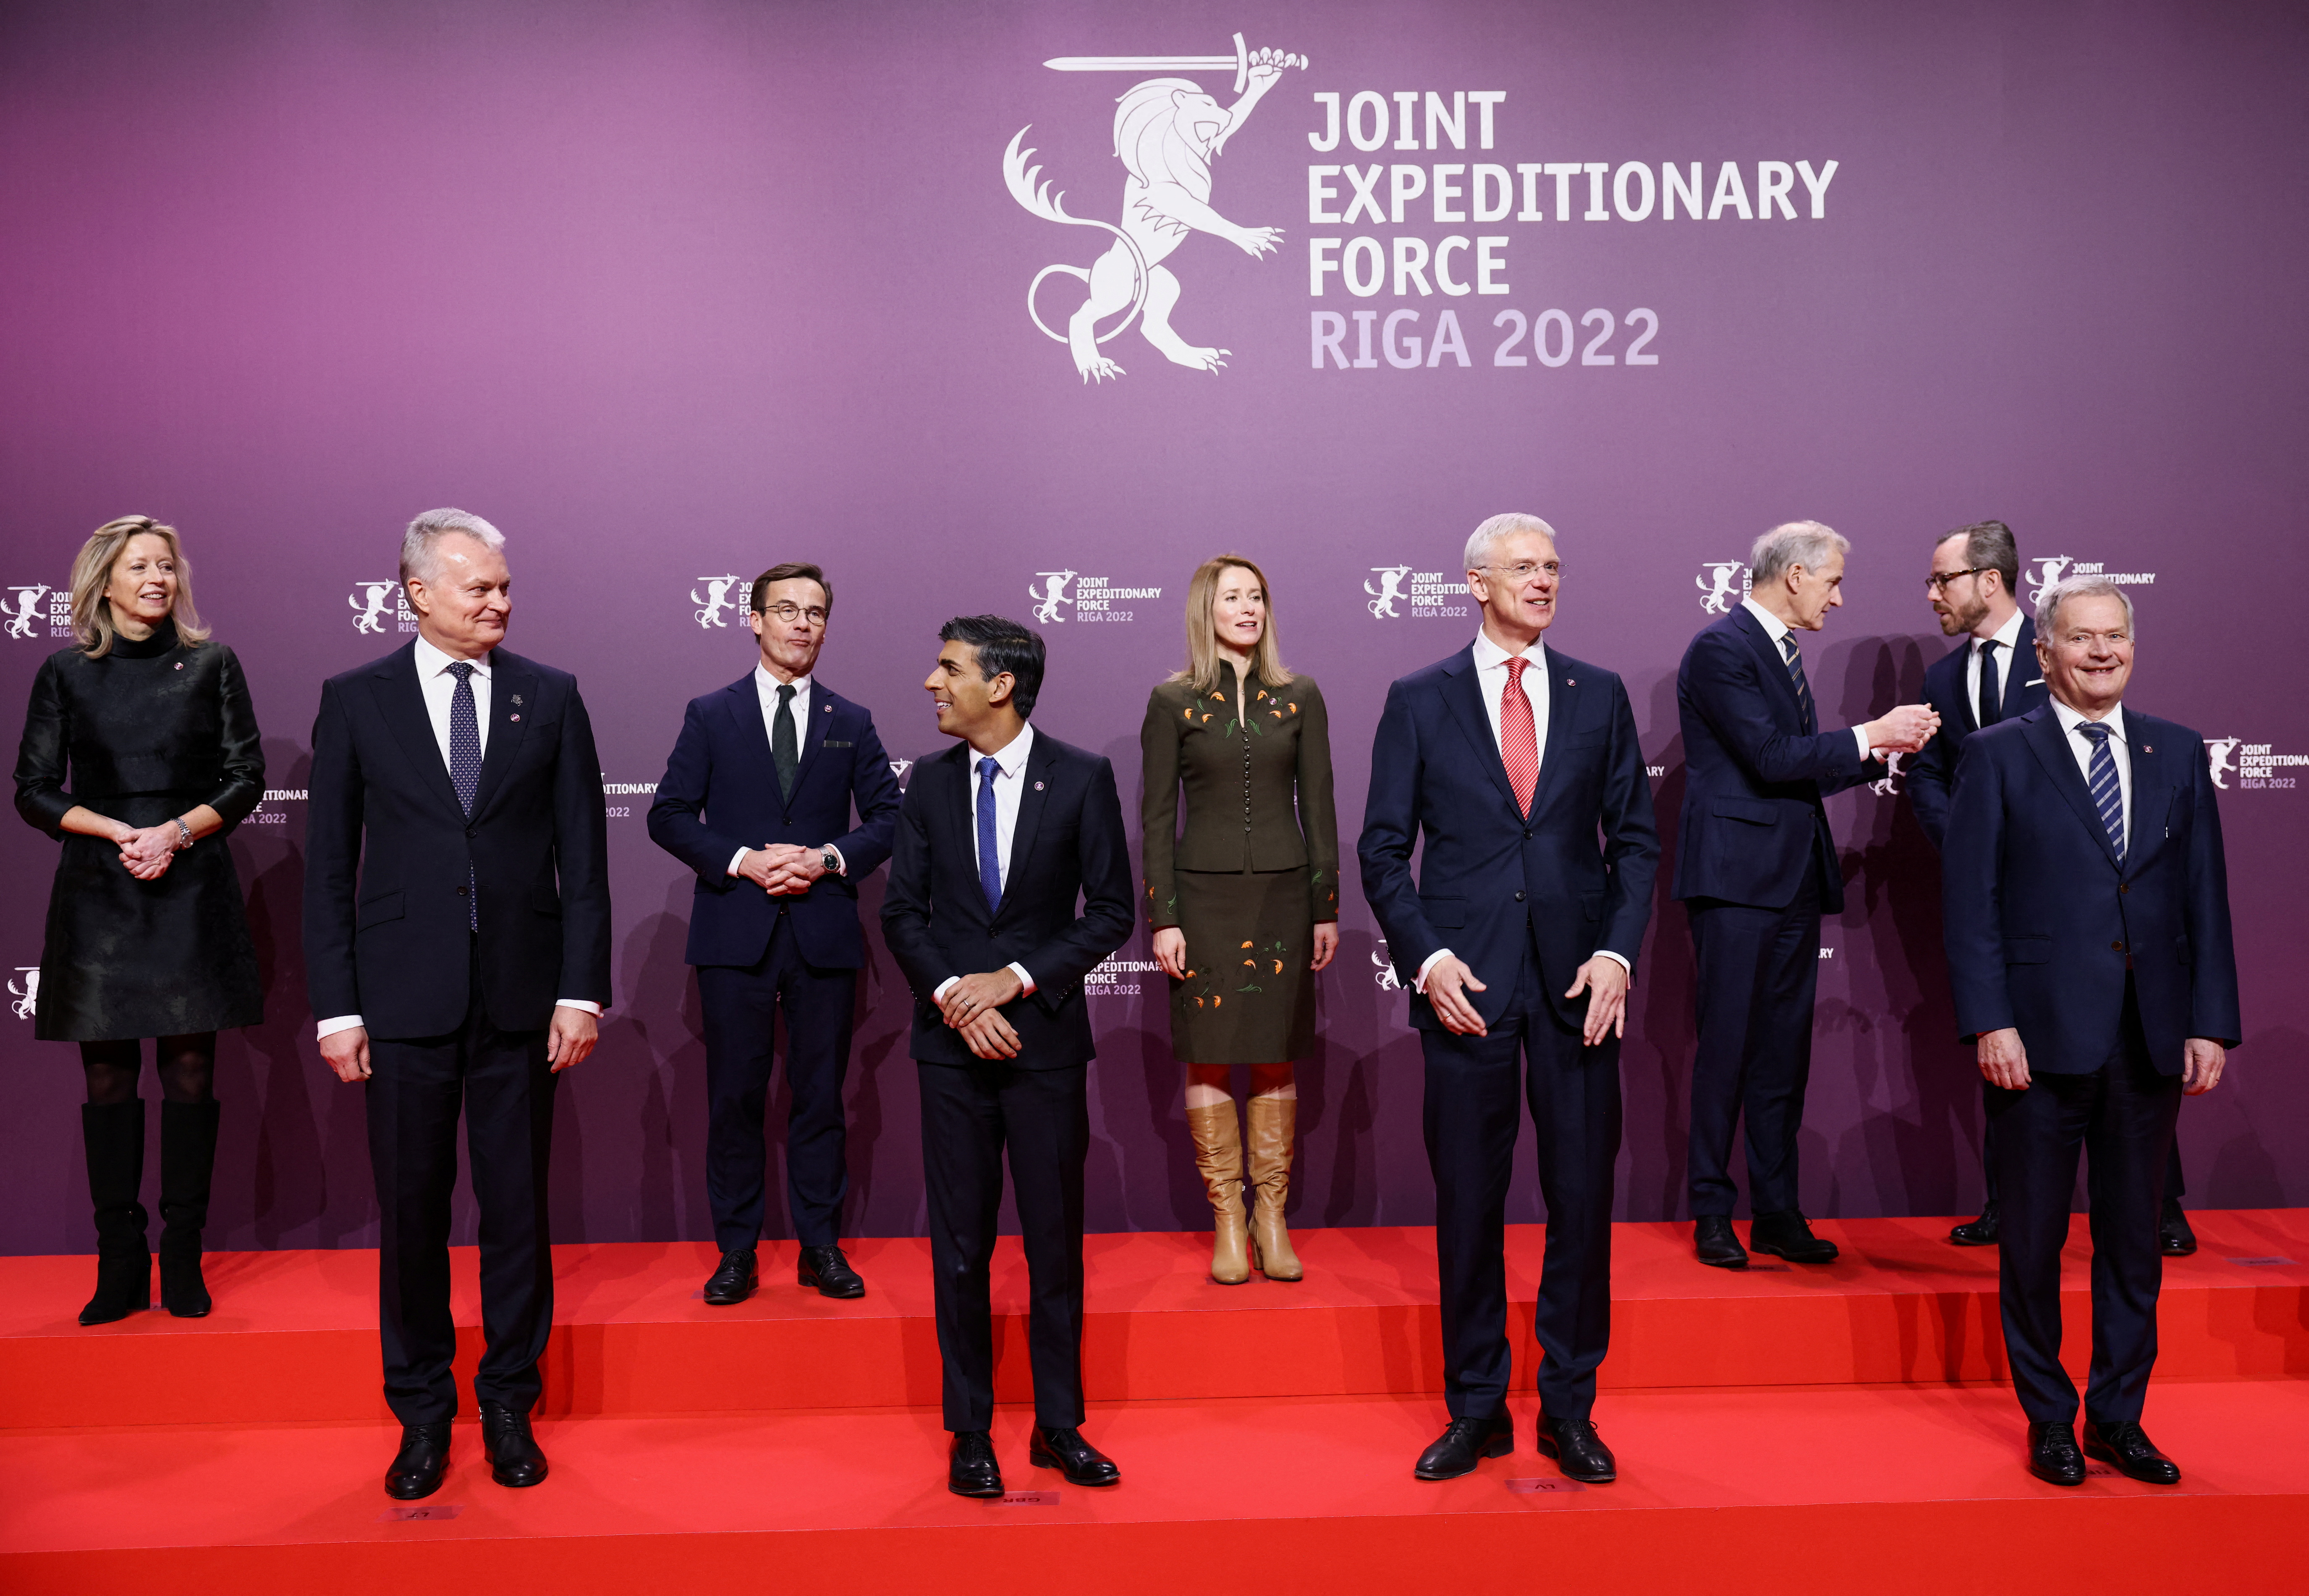 December, 2022: Rishi poses for a photo with world leaders at a meeting of Joint Expeditionary Force countries in Riga, Latvia